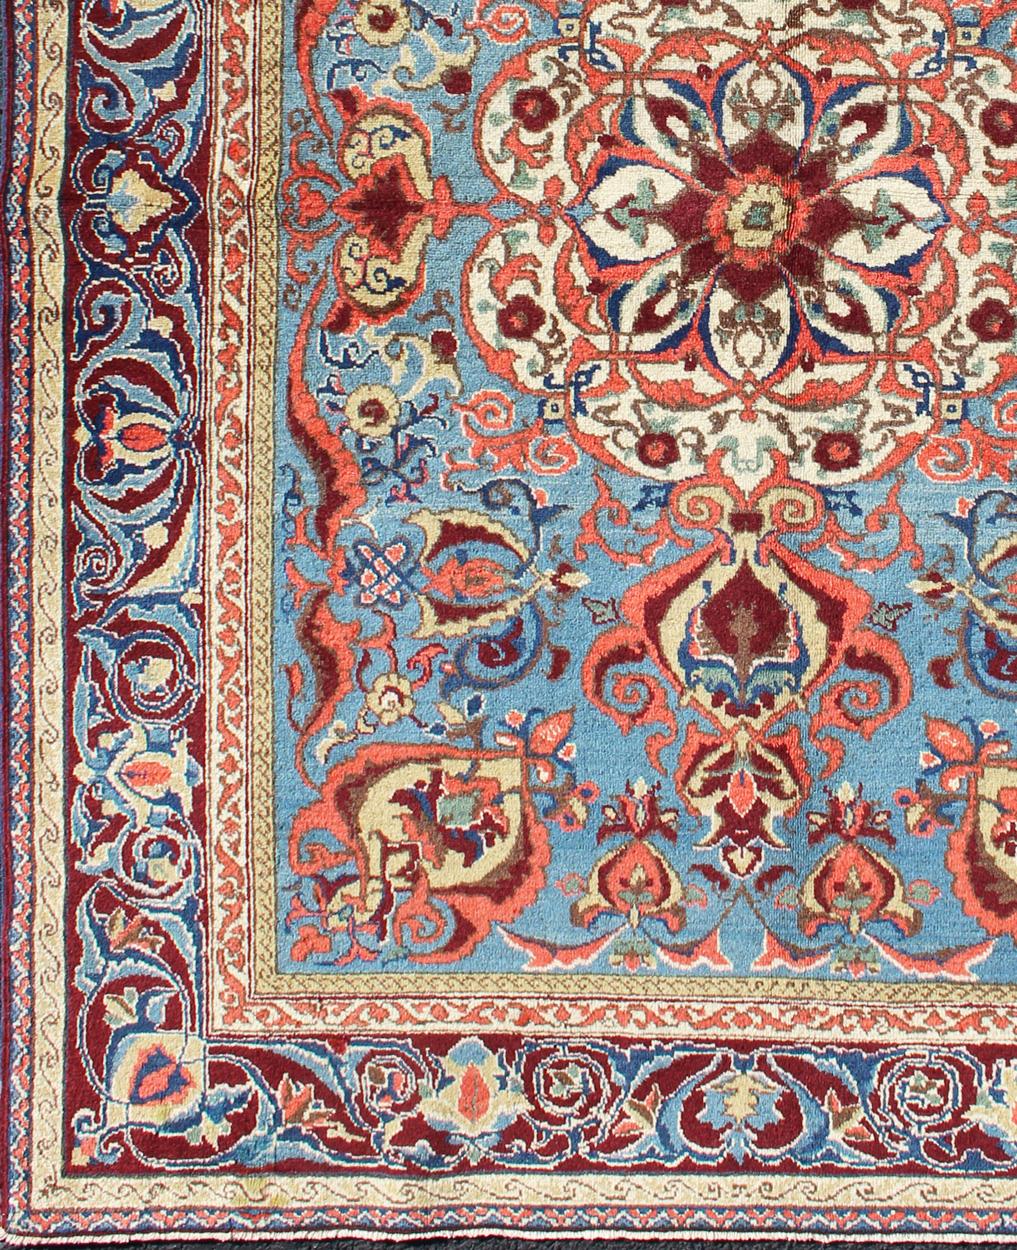 Antique Sivas Fine Rug with Blue Background Wine Border and Intricate Design. Fine Weave Turkish Sivas Rug Keivan Woven Arts Rug / TOZ-136542 Fine Sivas, Measures: 4.6 x 6.4
The rich, opulent colors and sophisticated artistry of this antique Sivas